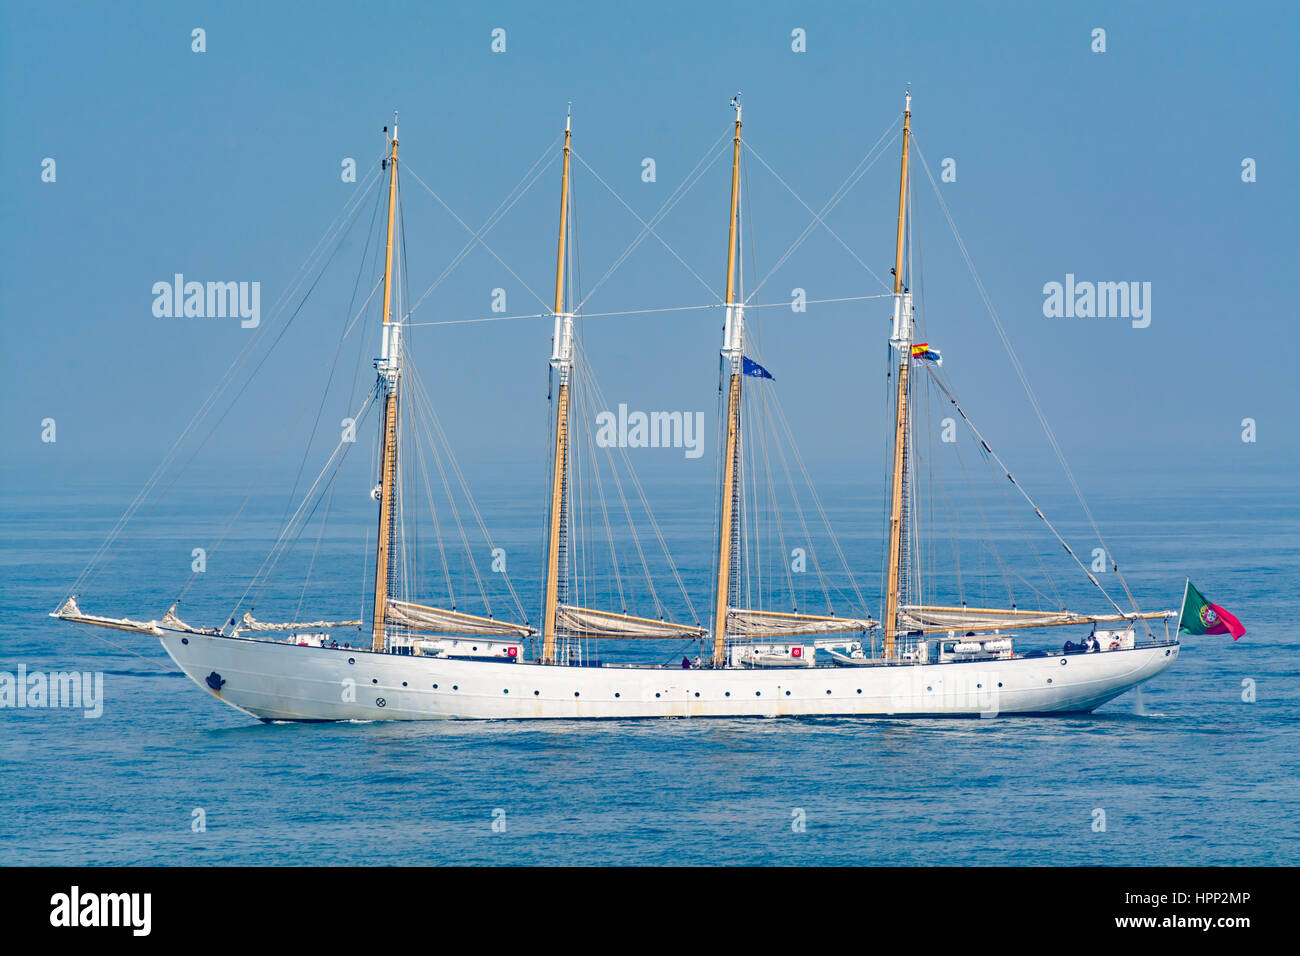 Tall Ship Sailing On Sea Against Blue Sky Banque D'Images